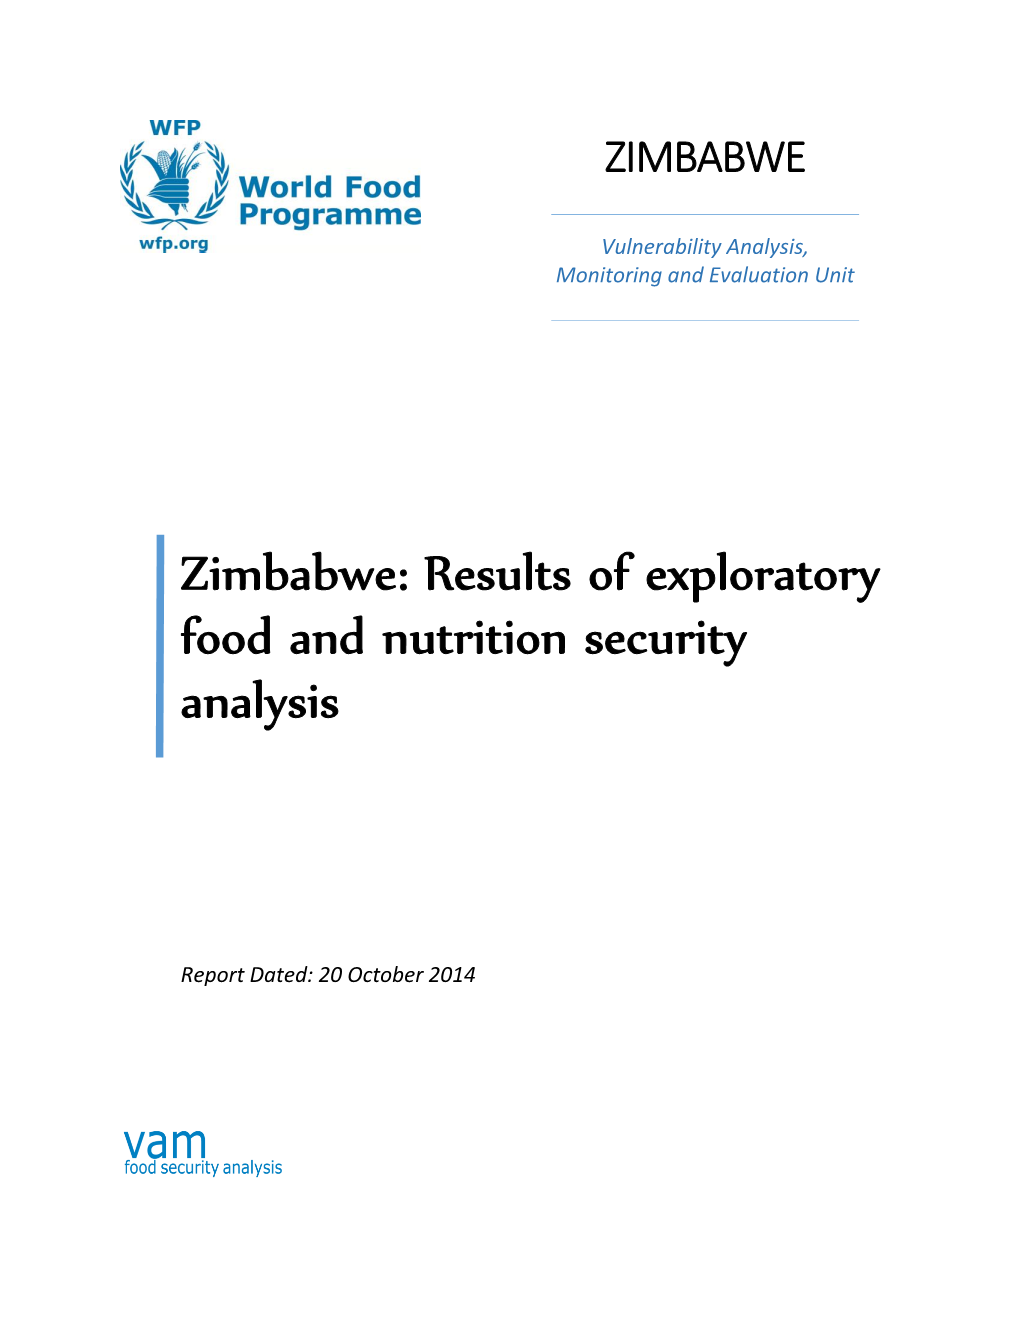 Zimbabwe: Results of Exploratory Food and Nutrition Security Analysis